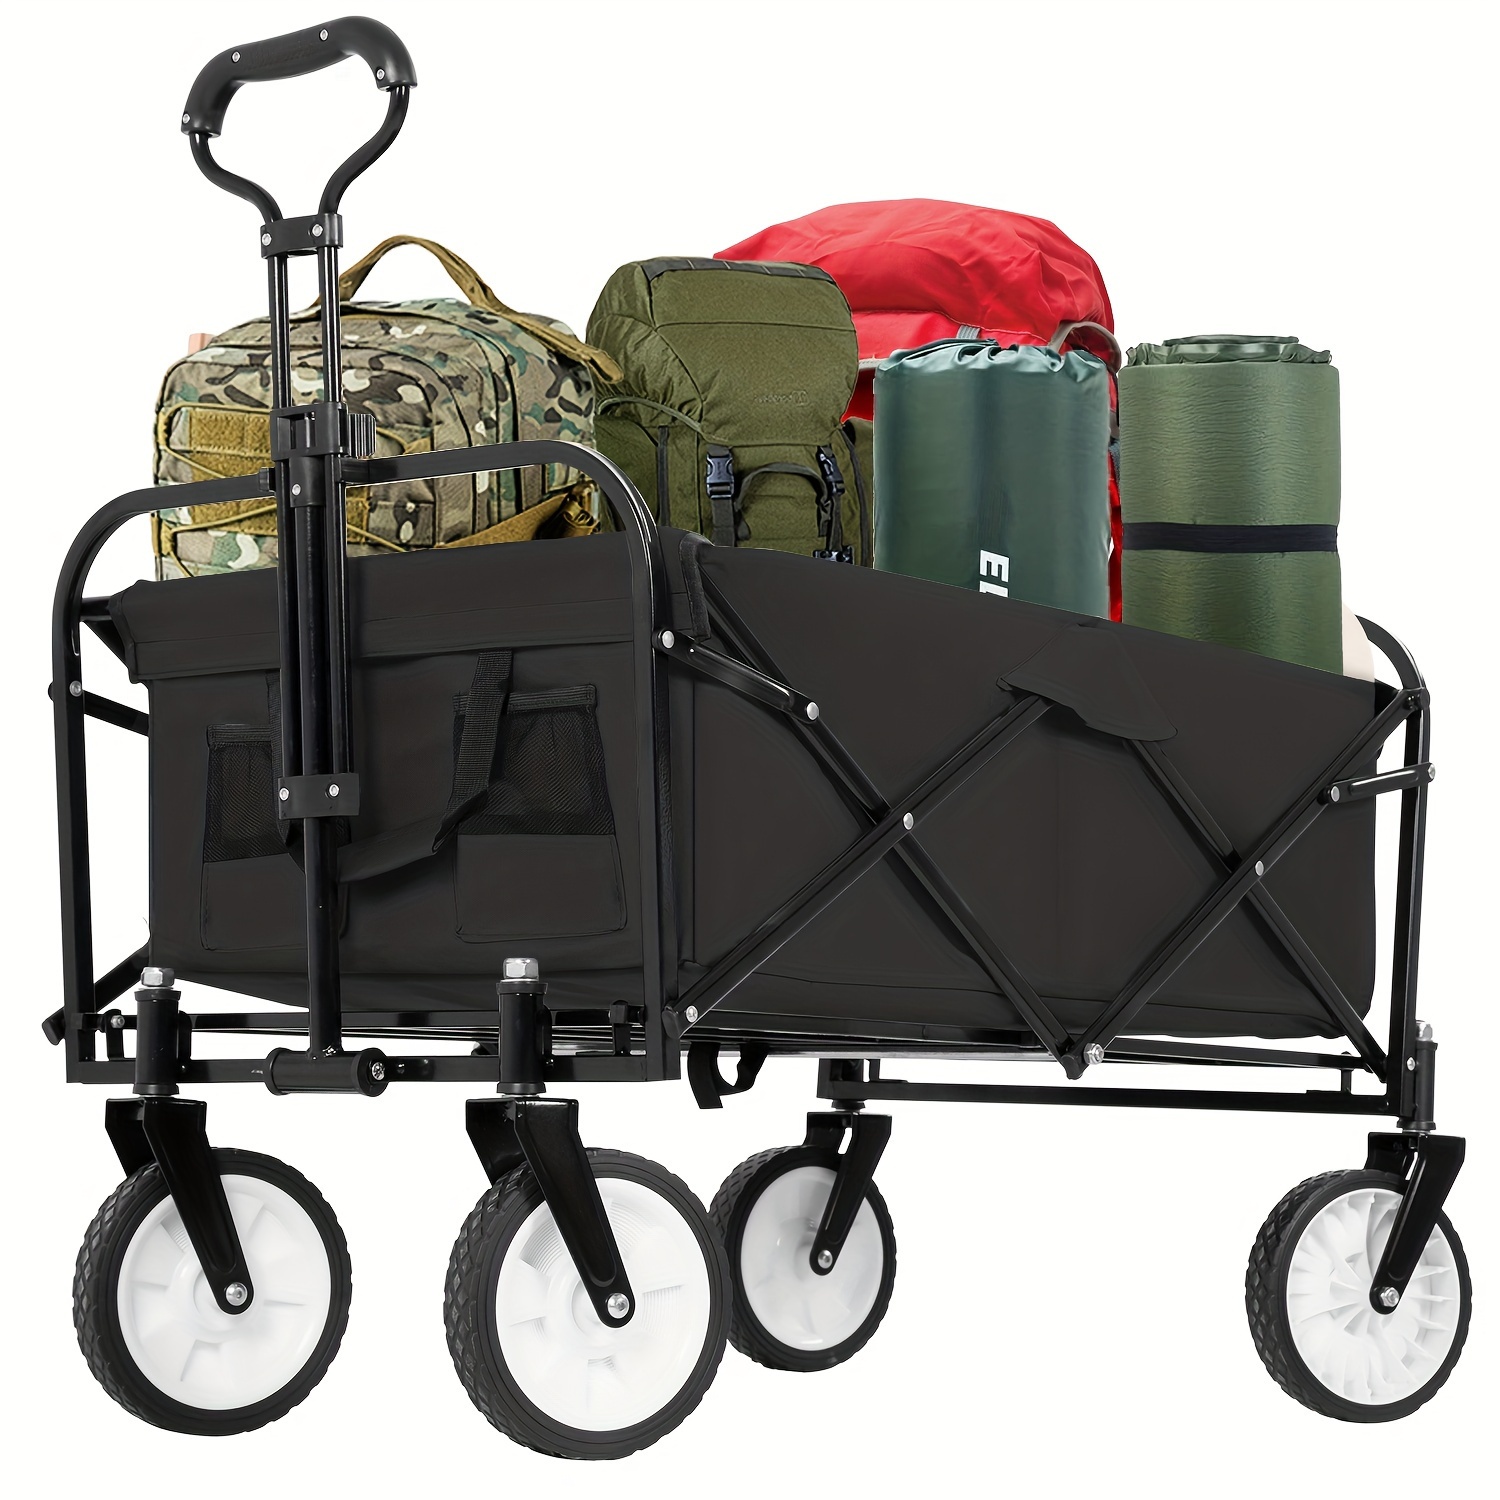 

Collapsible Wagon Cart Folding Foldable Garden Cart With Large Capacity, 176 Lbs Capacity Portable Utility Wagon Cart Heavy Duty For Beach Camping